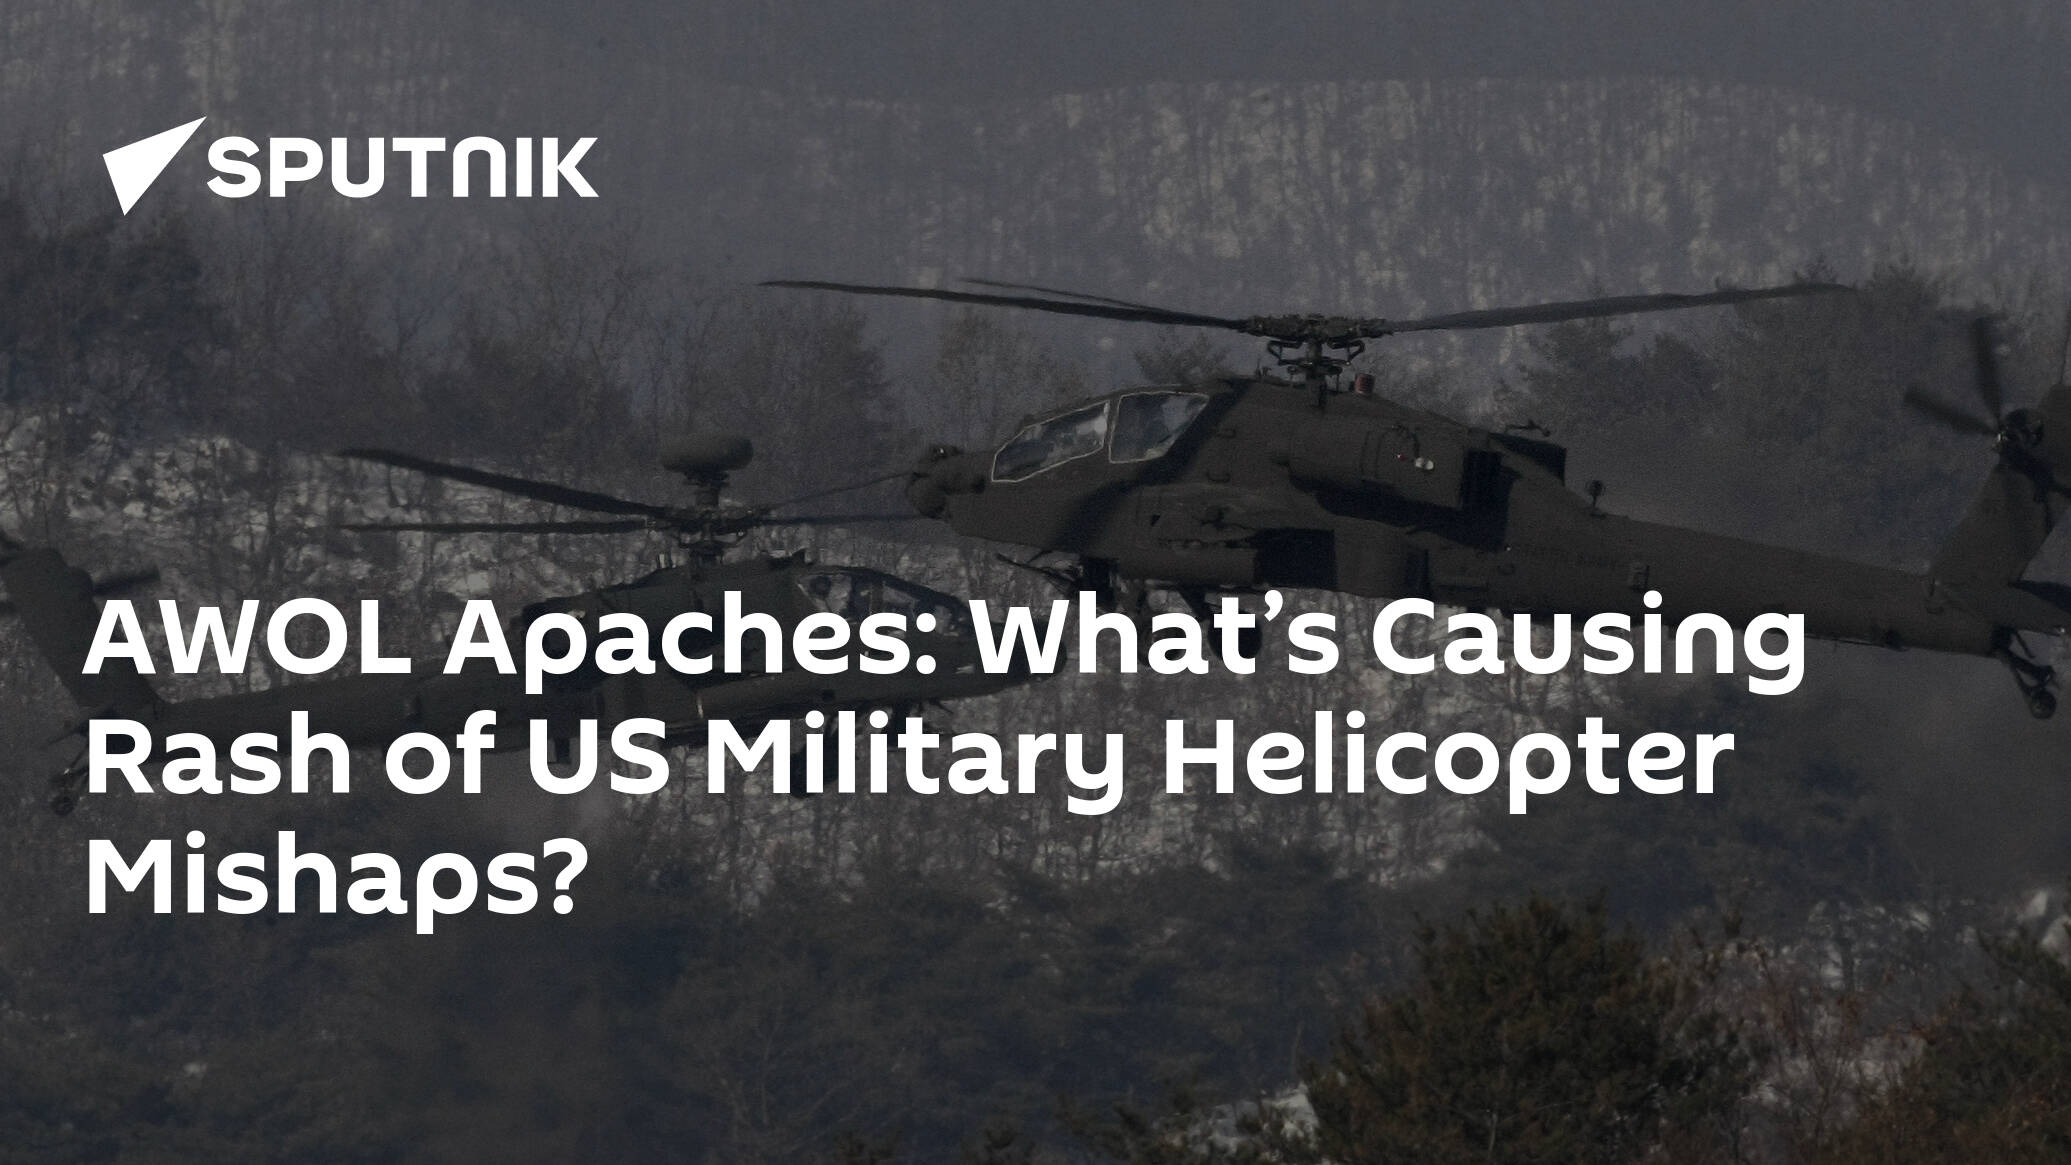 AWOL Apaches: What’s Causing Rash of US Military Helicopter Mishaps?